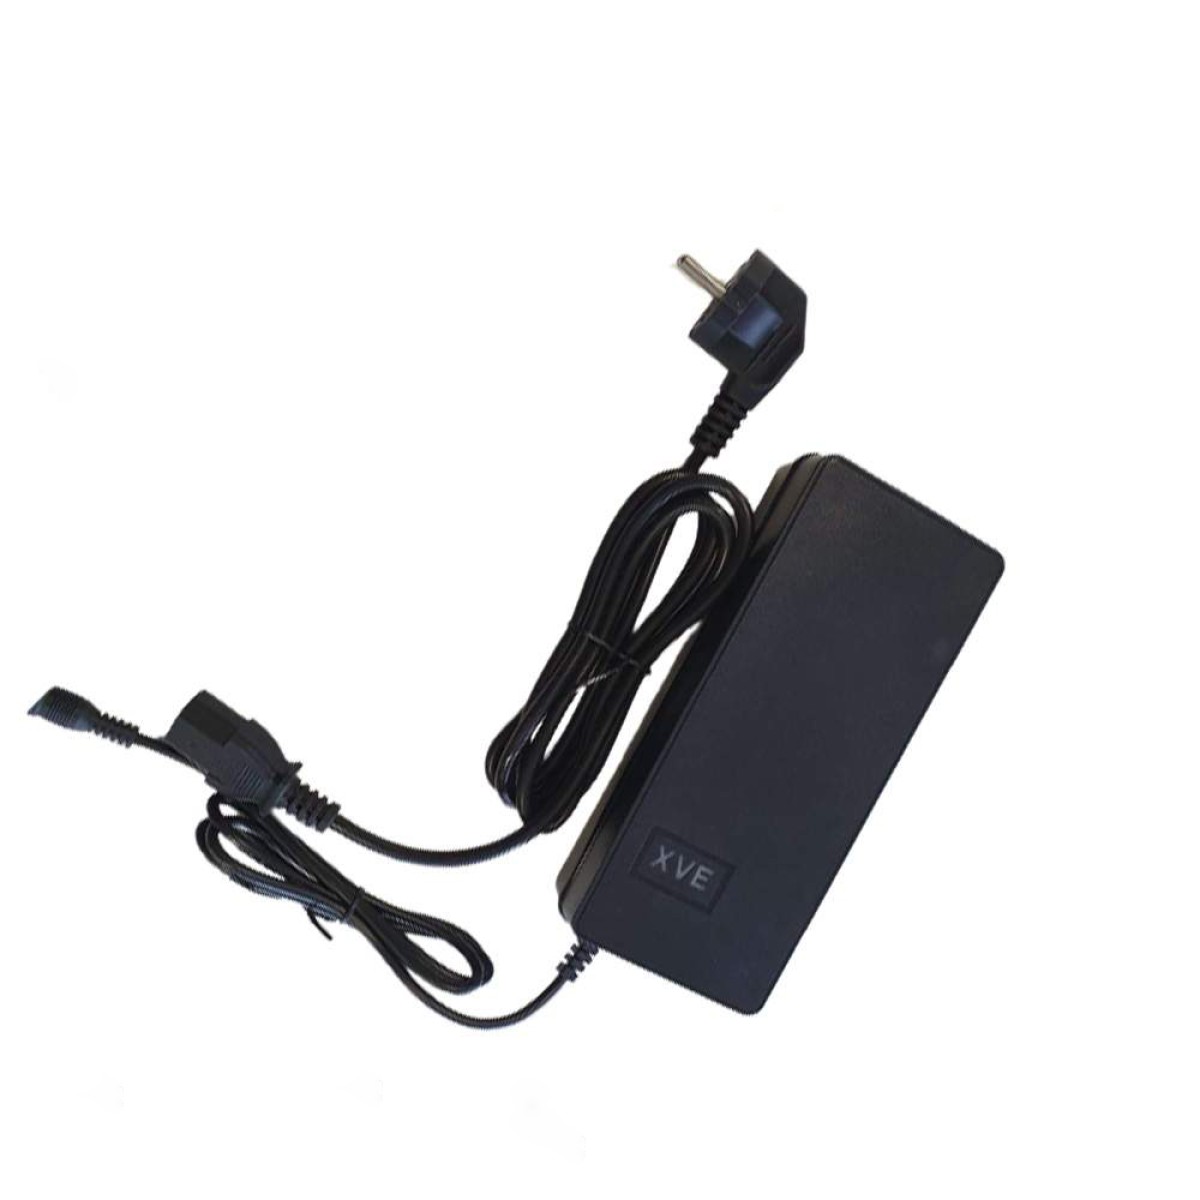 Langfeite L8S L8 aerlang 54.6V2A electric scooter high quality battery charger